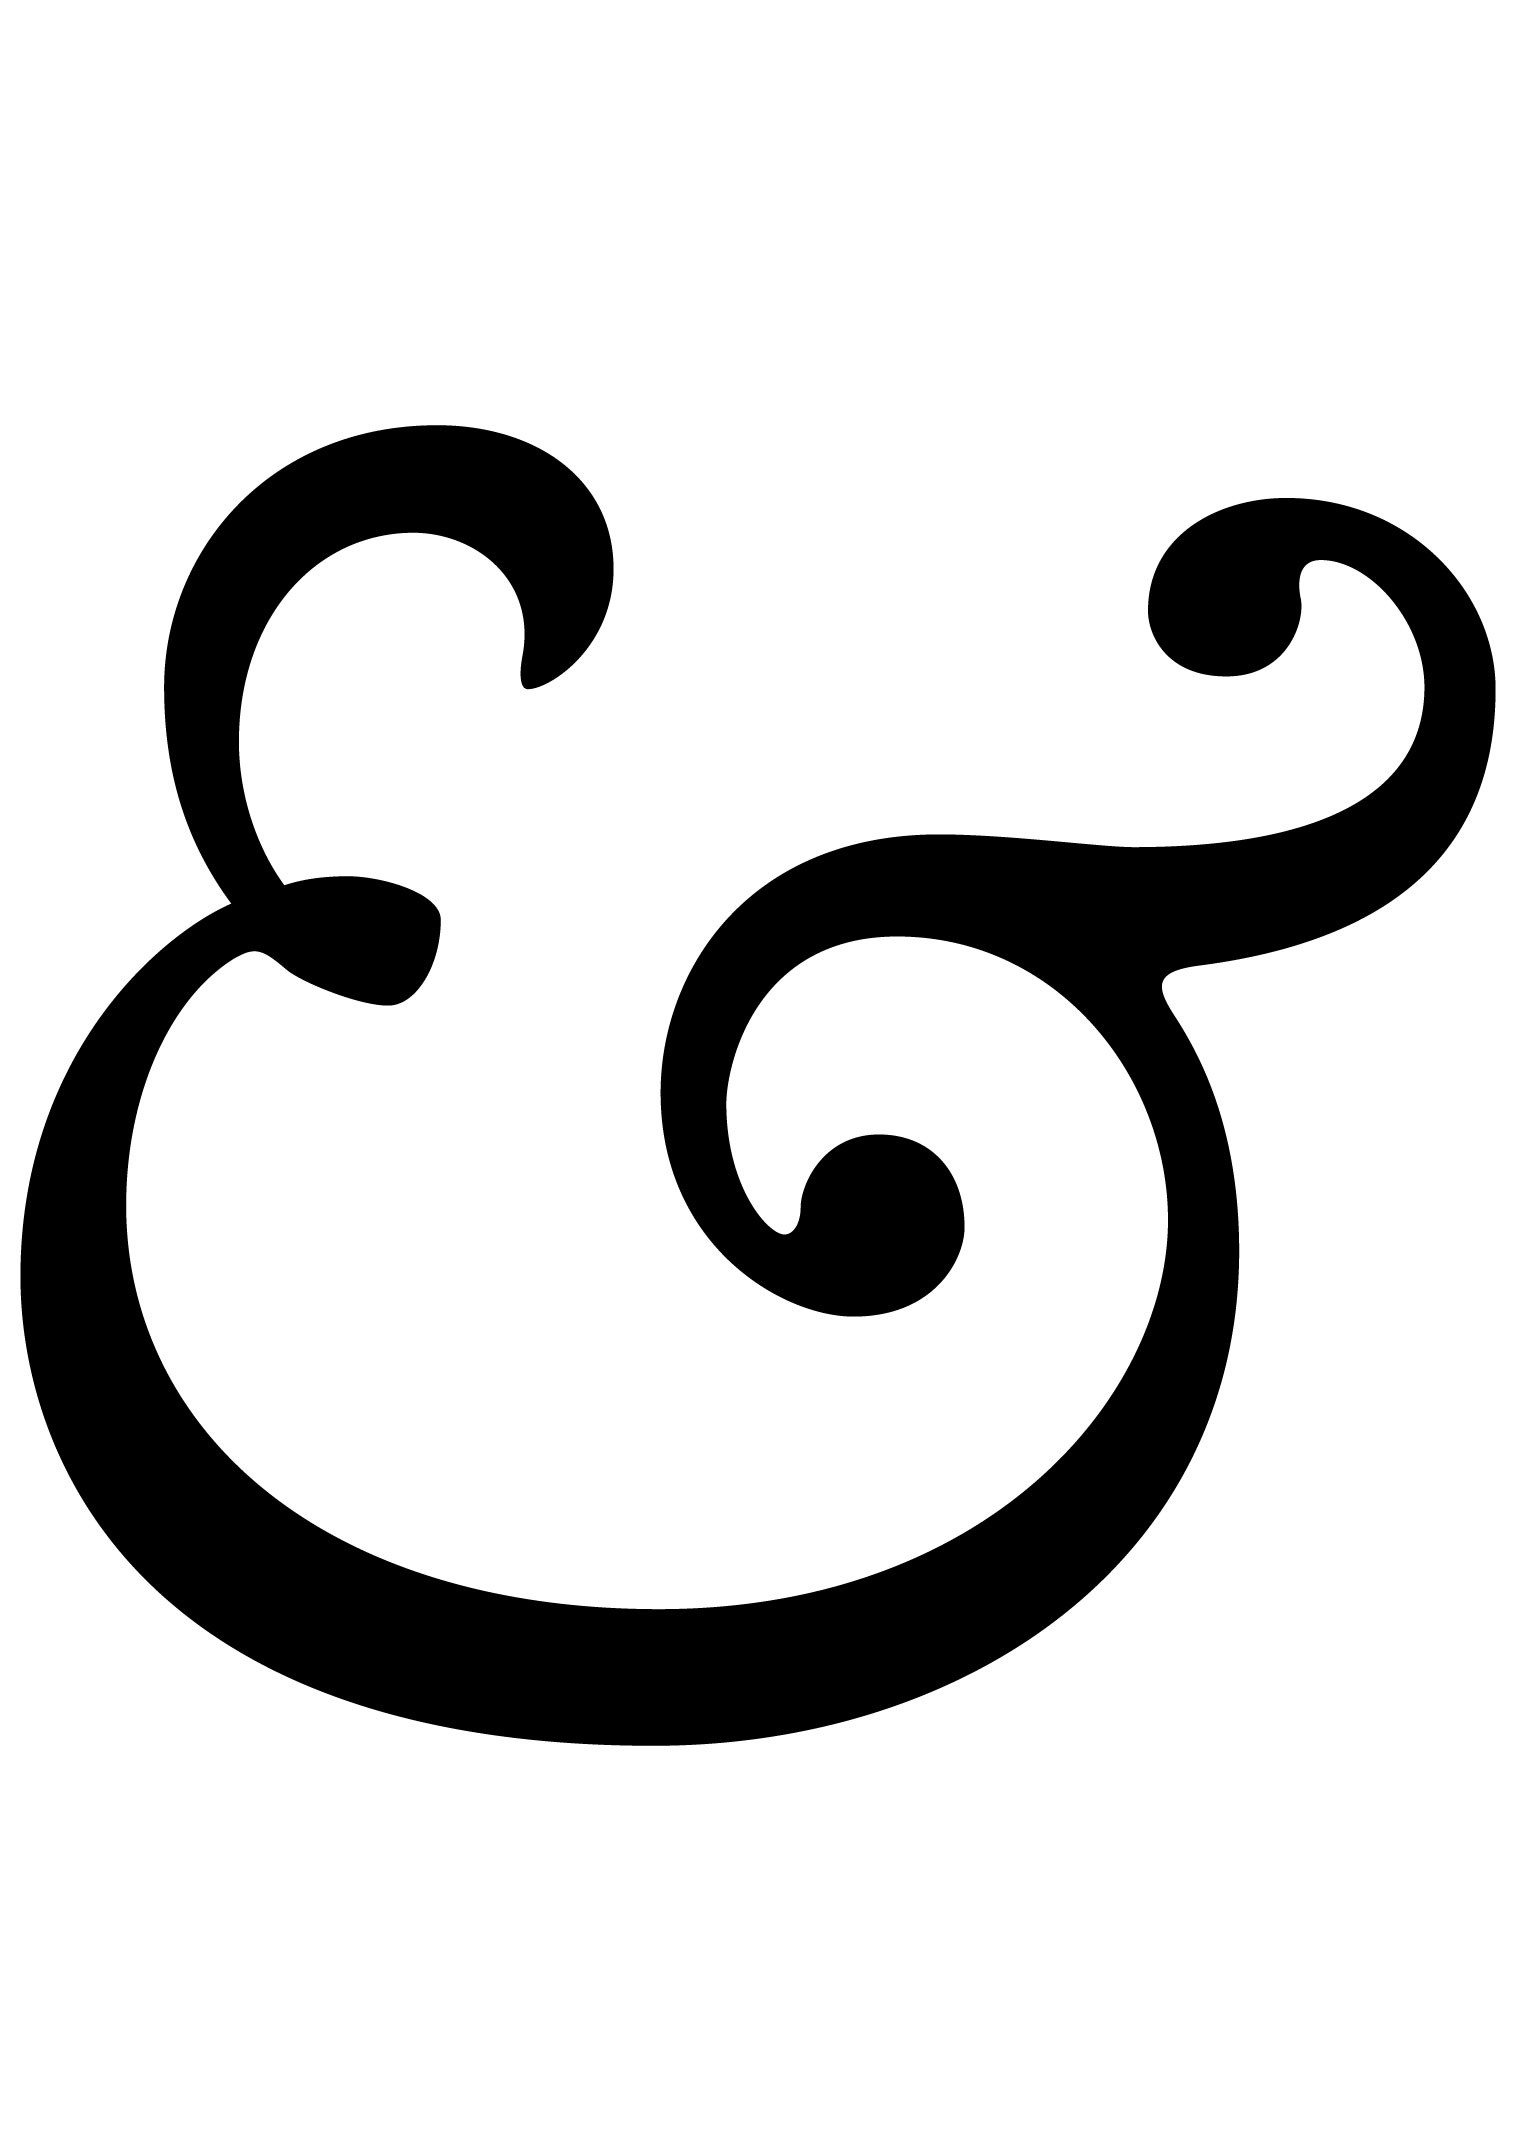 1000+ images about Ampersand | Typography, Texts and ...